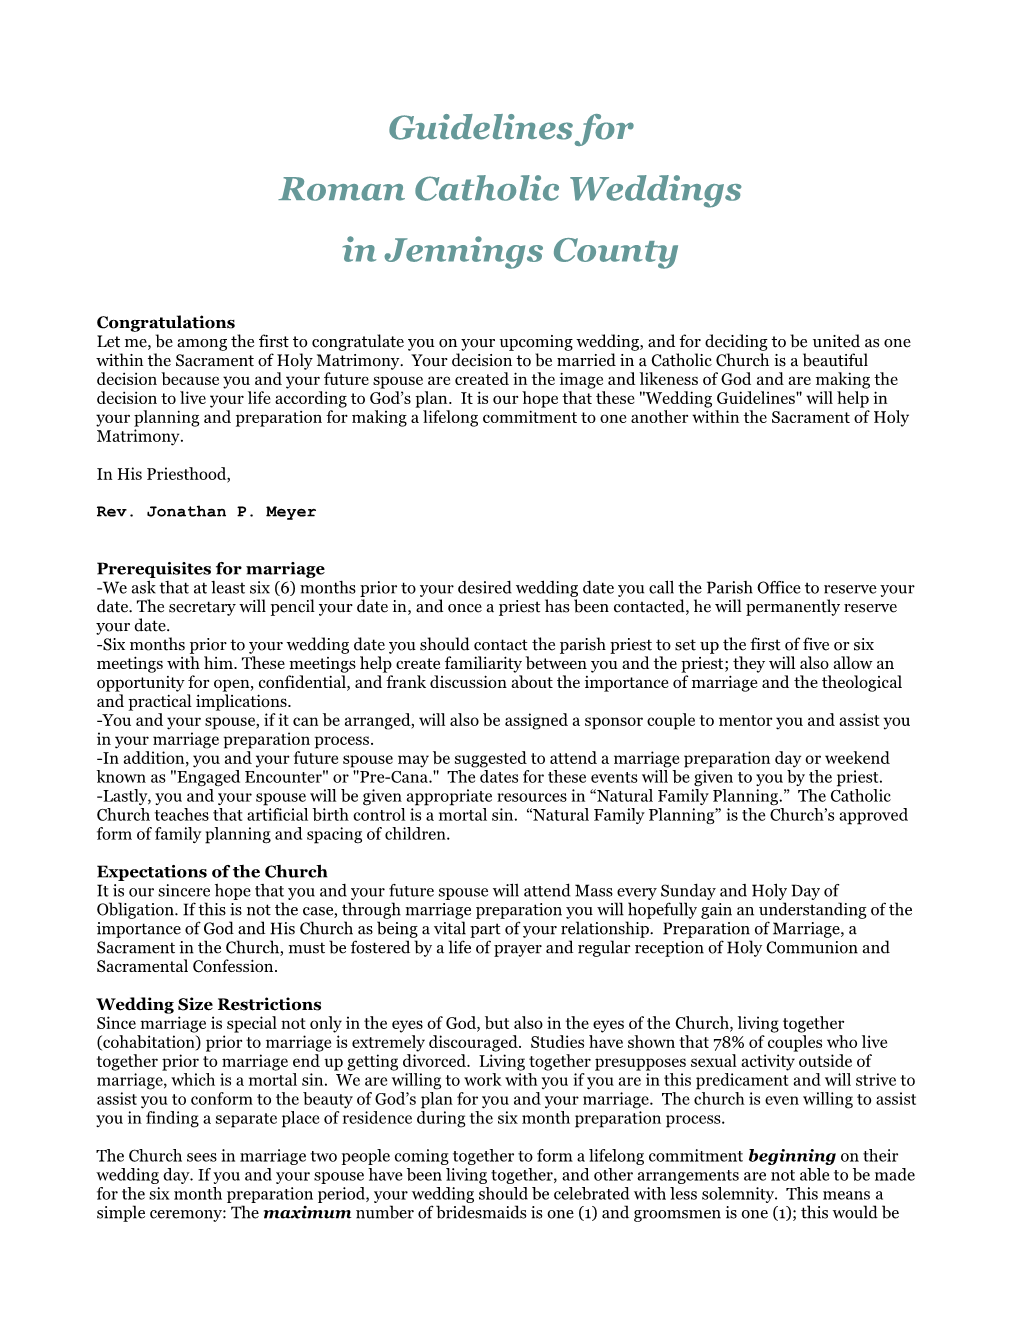 Guidelines for Roman Catholic Weddings in Jennings County